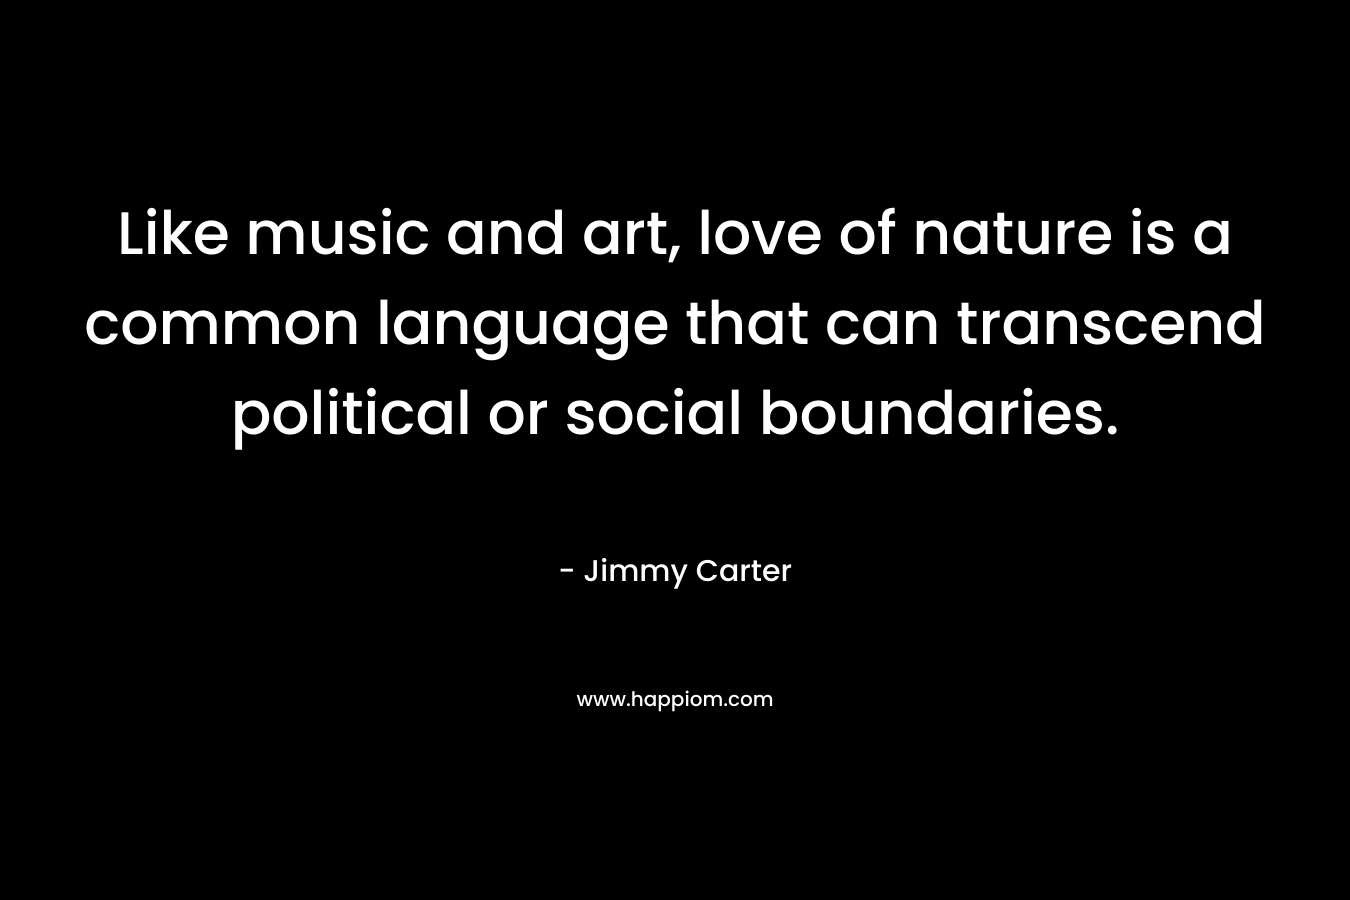 Like music and art, love of nature is a common language that can transcend political or social boundaries.